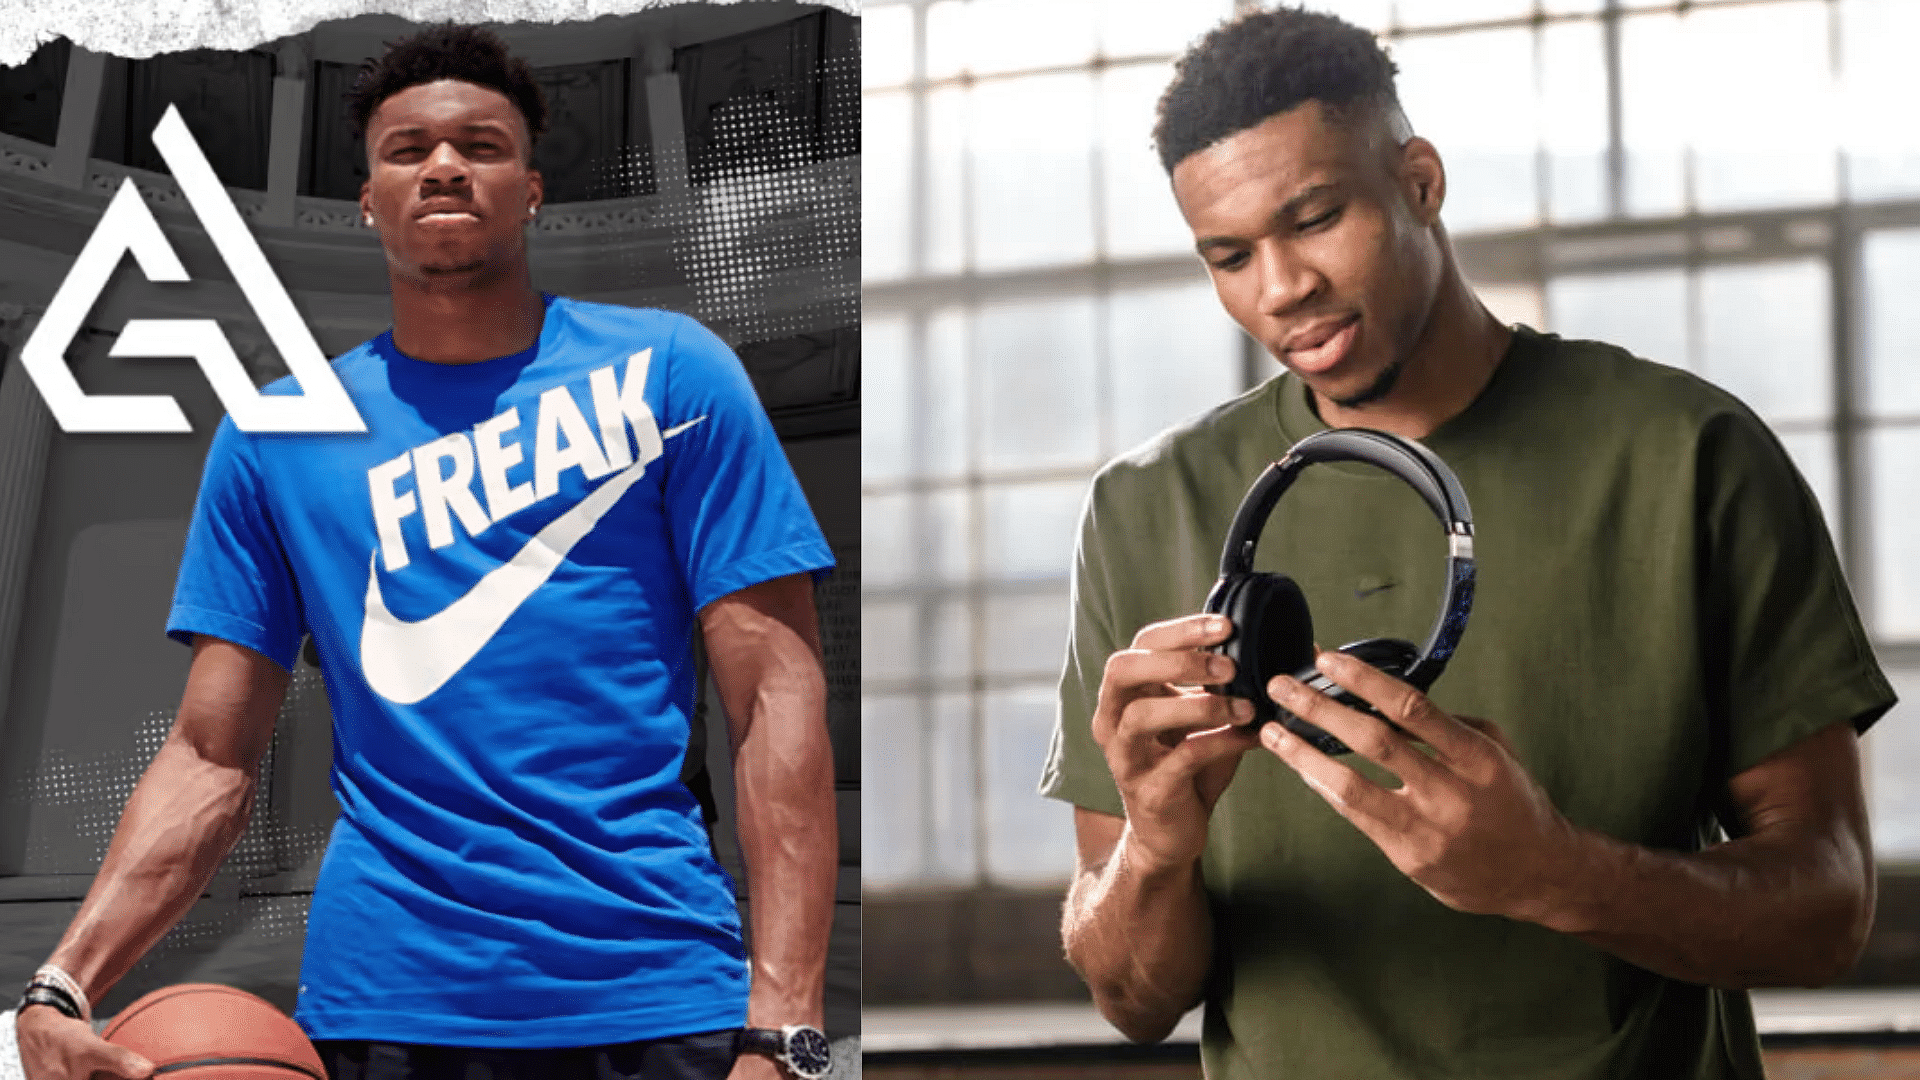 Giannis Antetokounmpo with Nike and JBL products